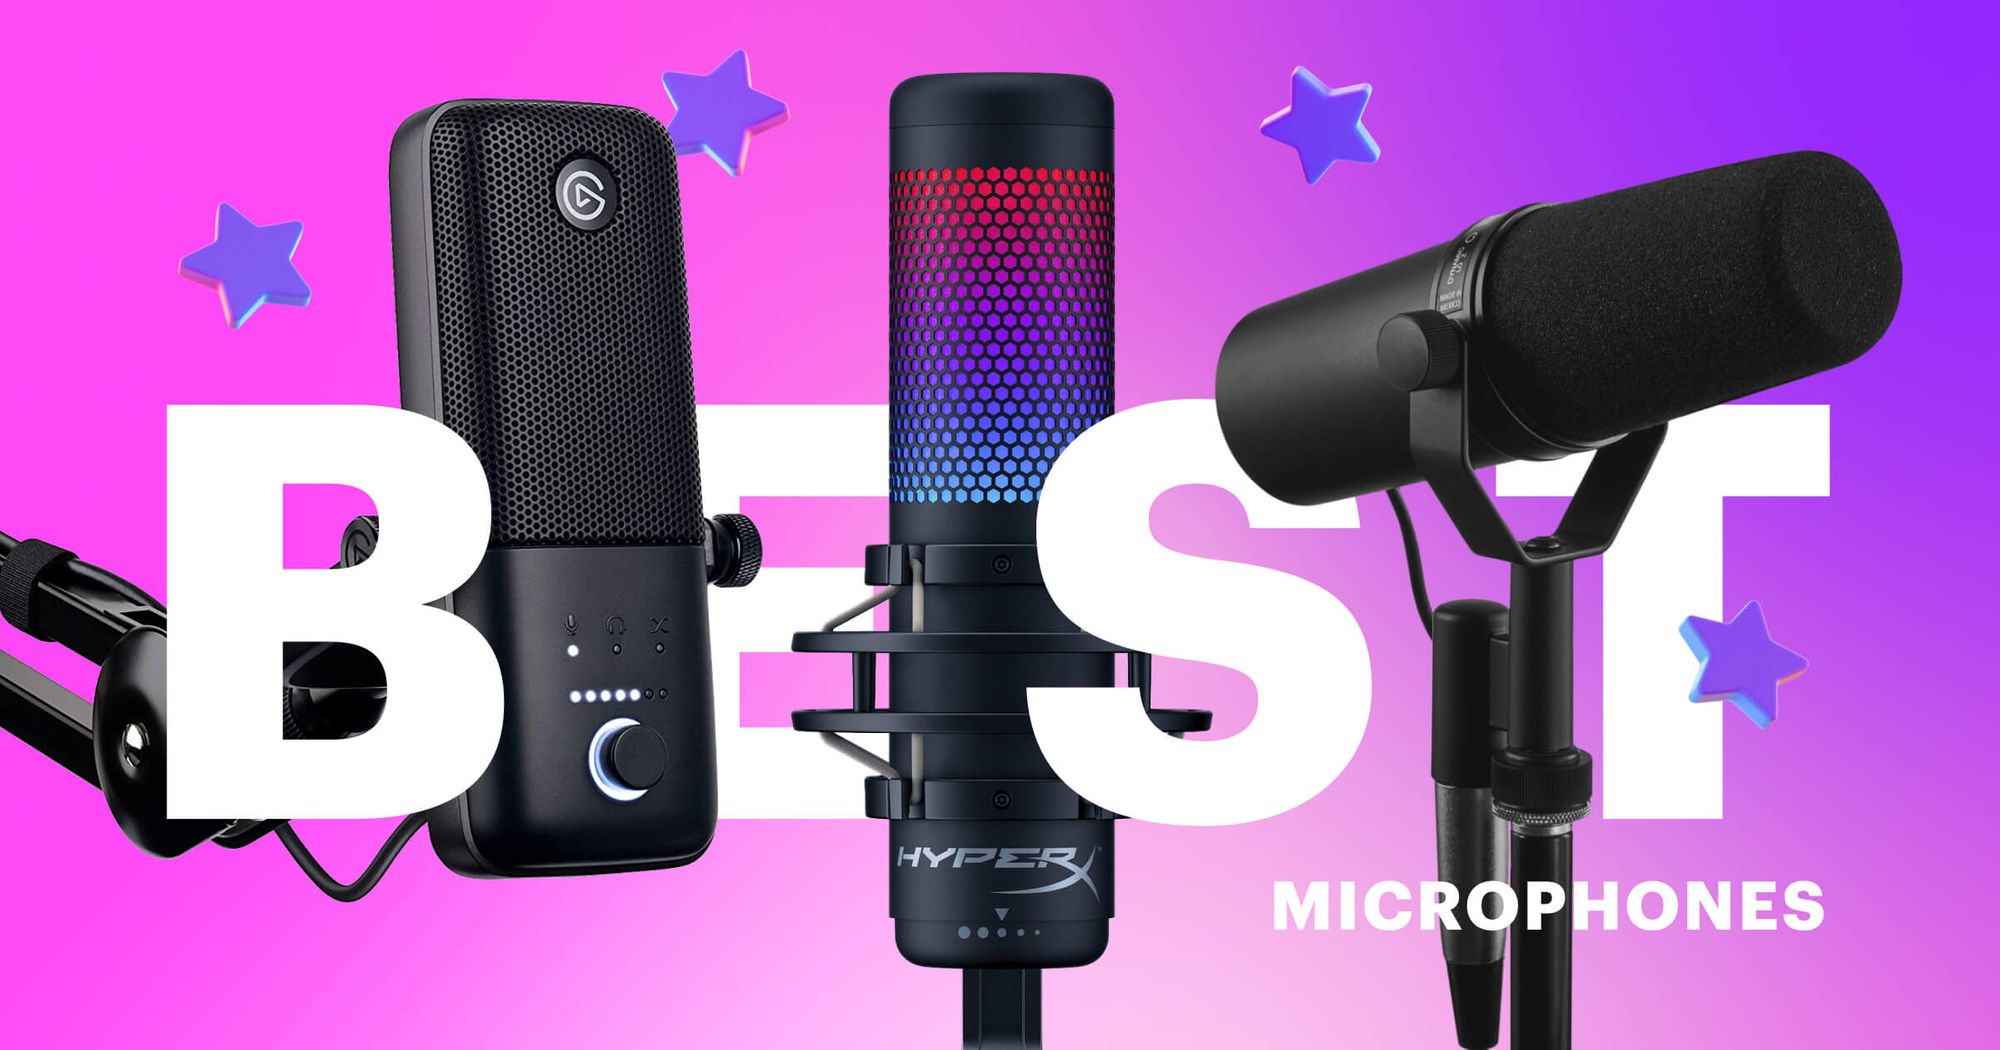 Top 6 microphones for live streaming in 2022